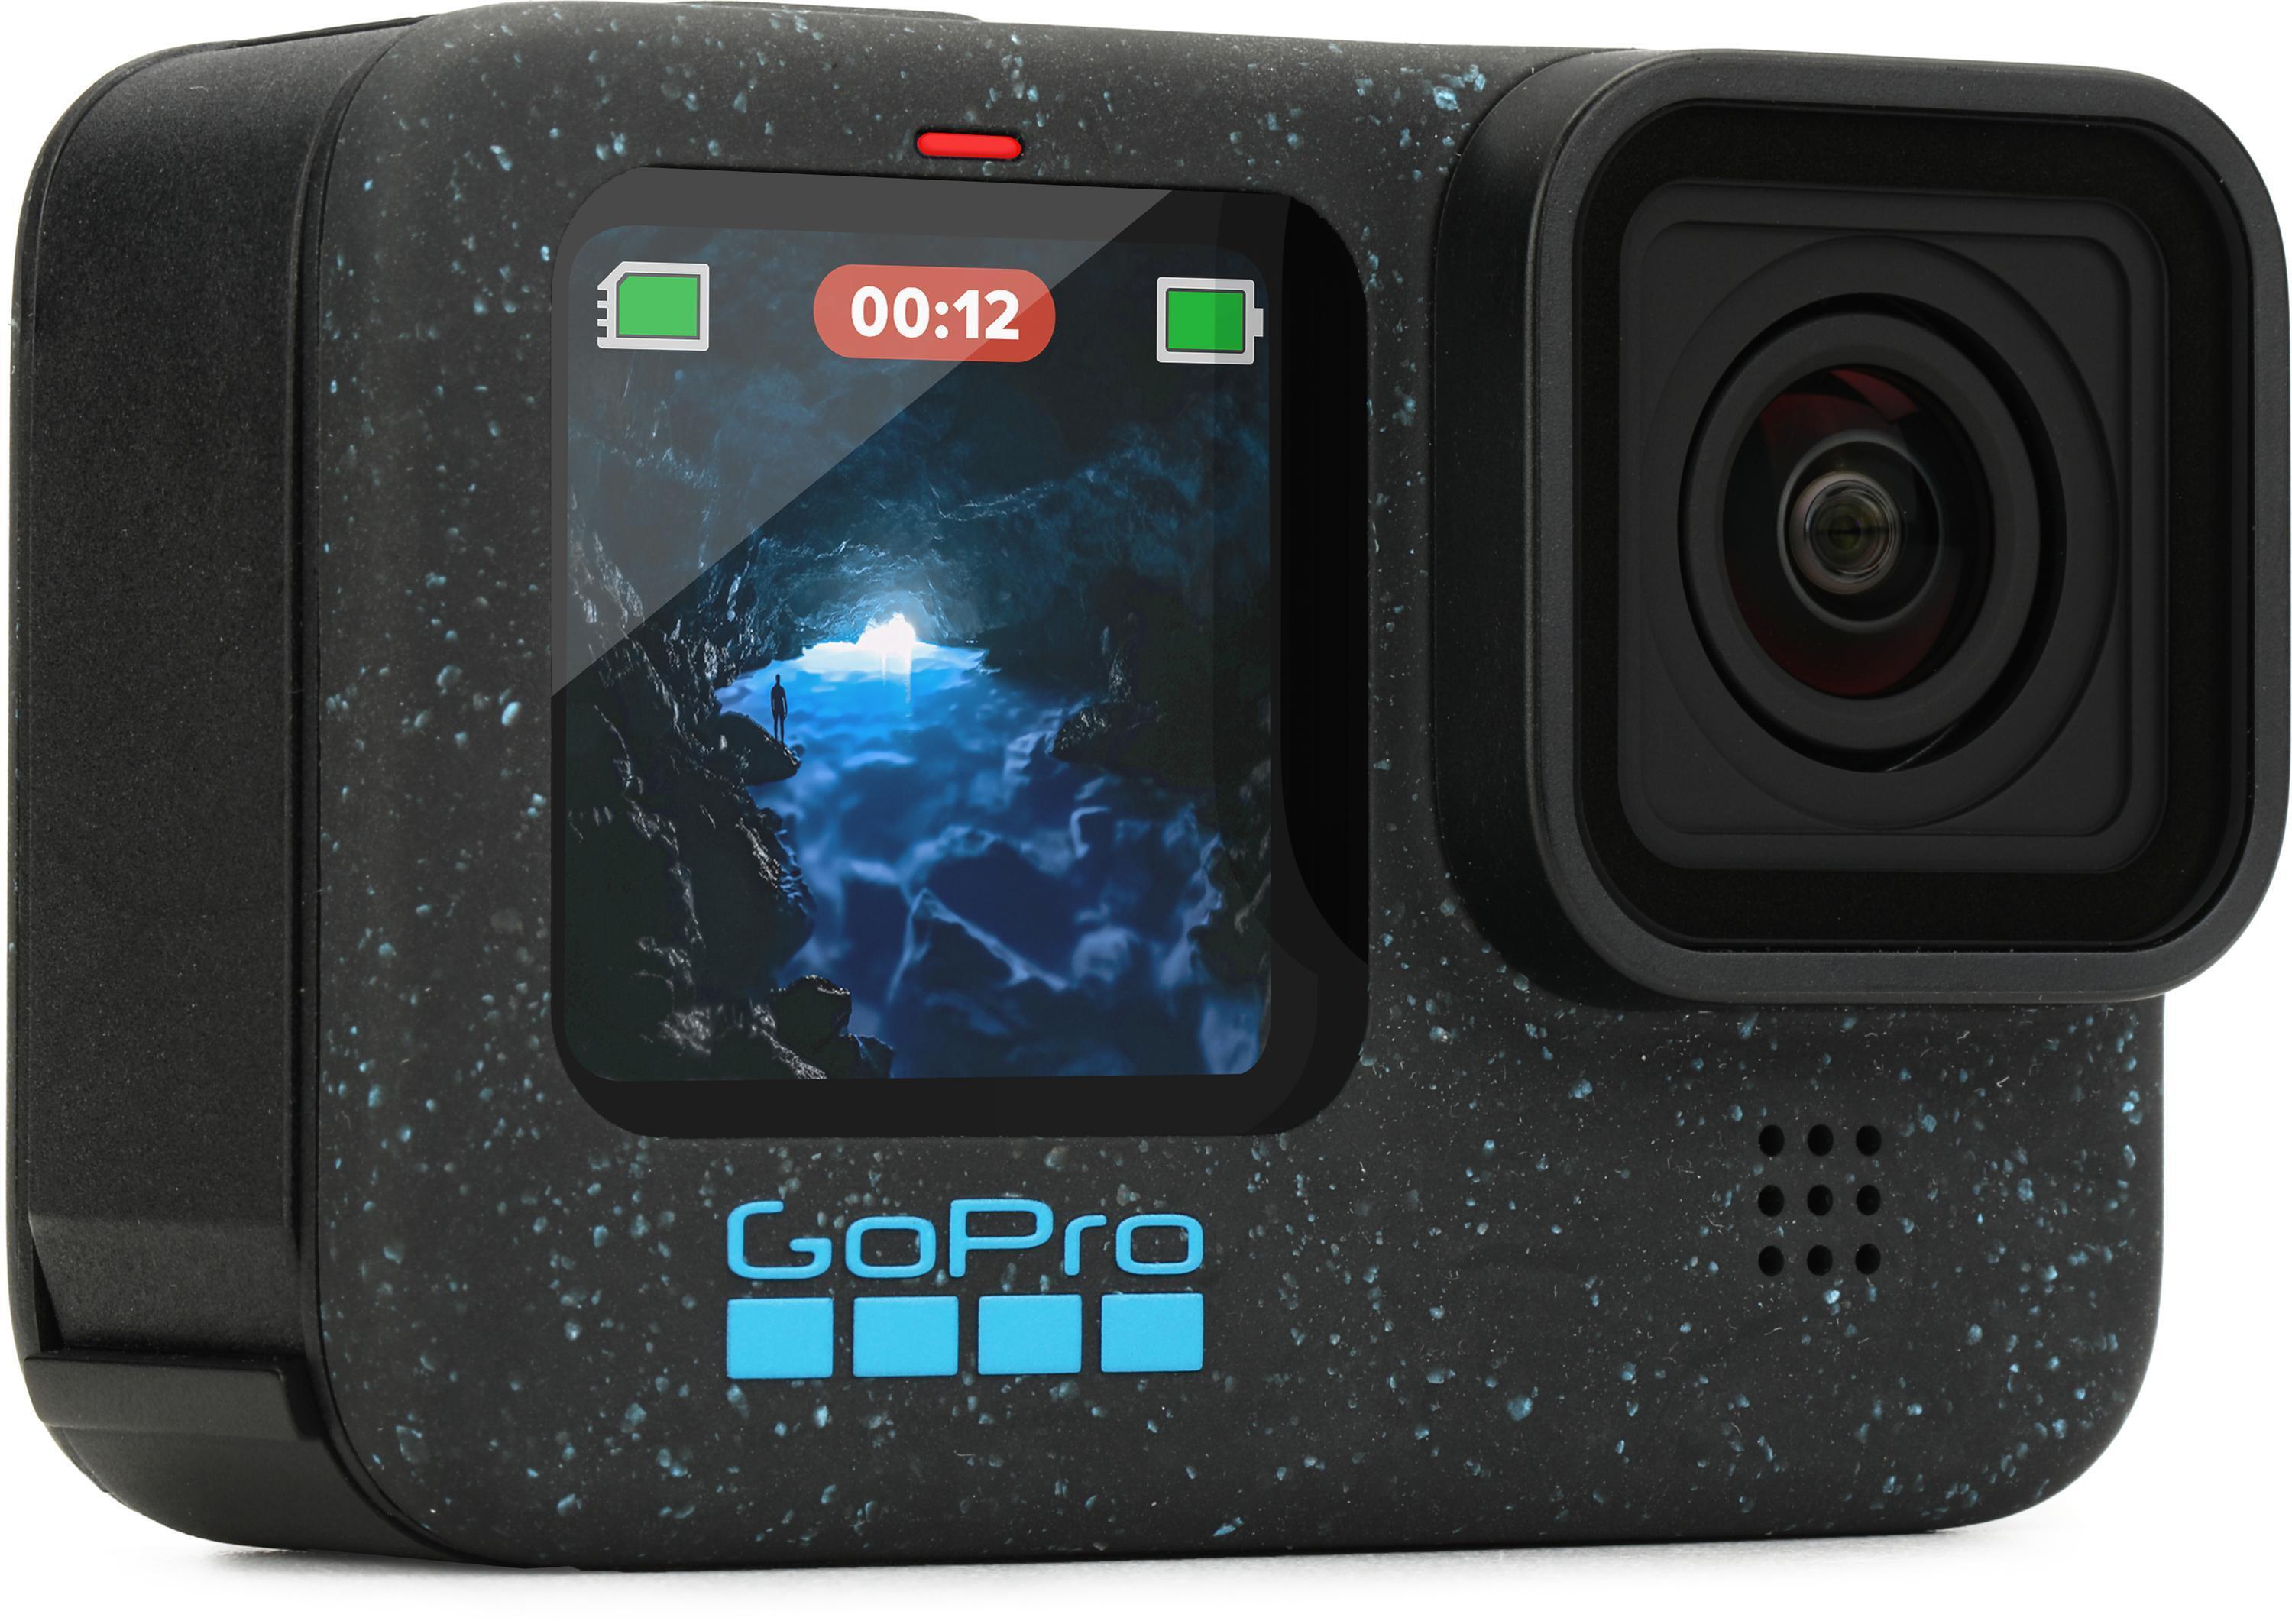  GoPro HERO12 Black Camera Bundle: Waterproof Action Cam with Go  Pro Dual Battery Charger, & 2X Enduro Batteries, and 128GB Micro SD Card  for Extended Adventure Recording : Electronics